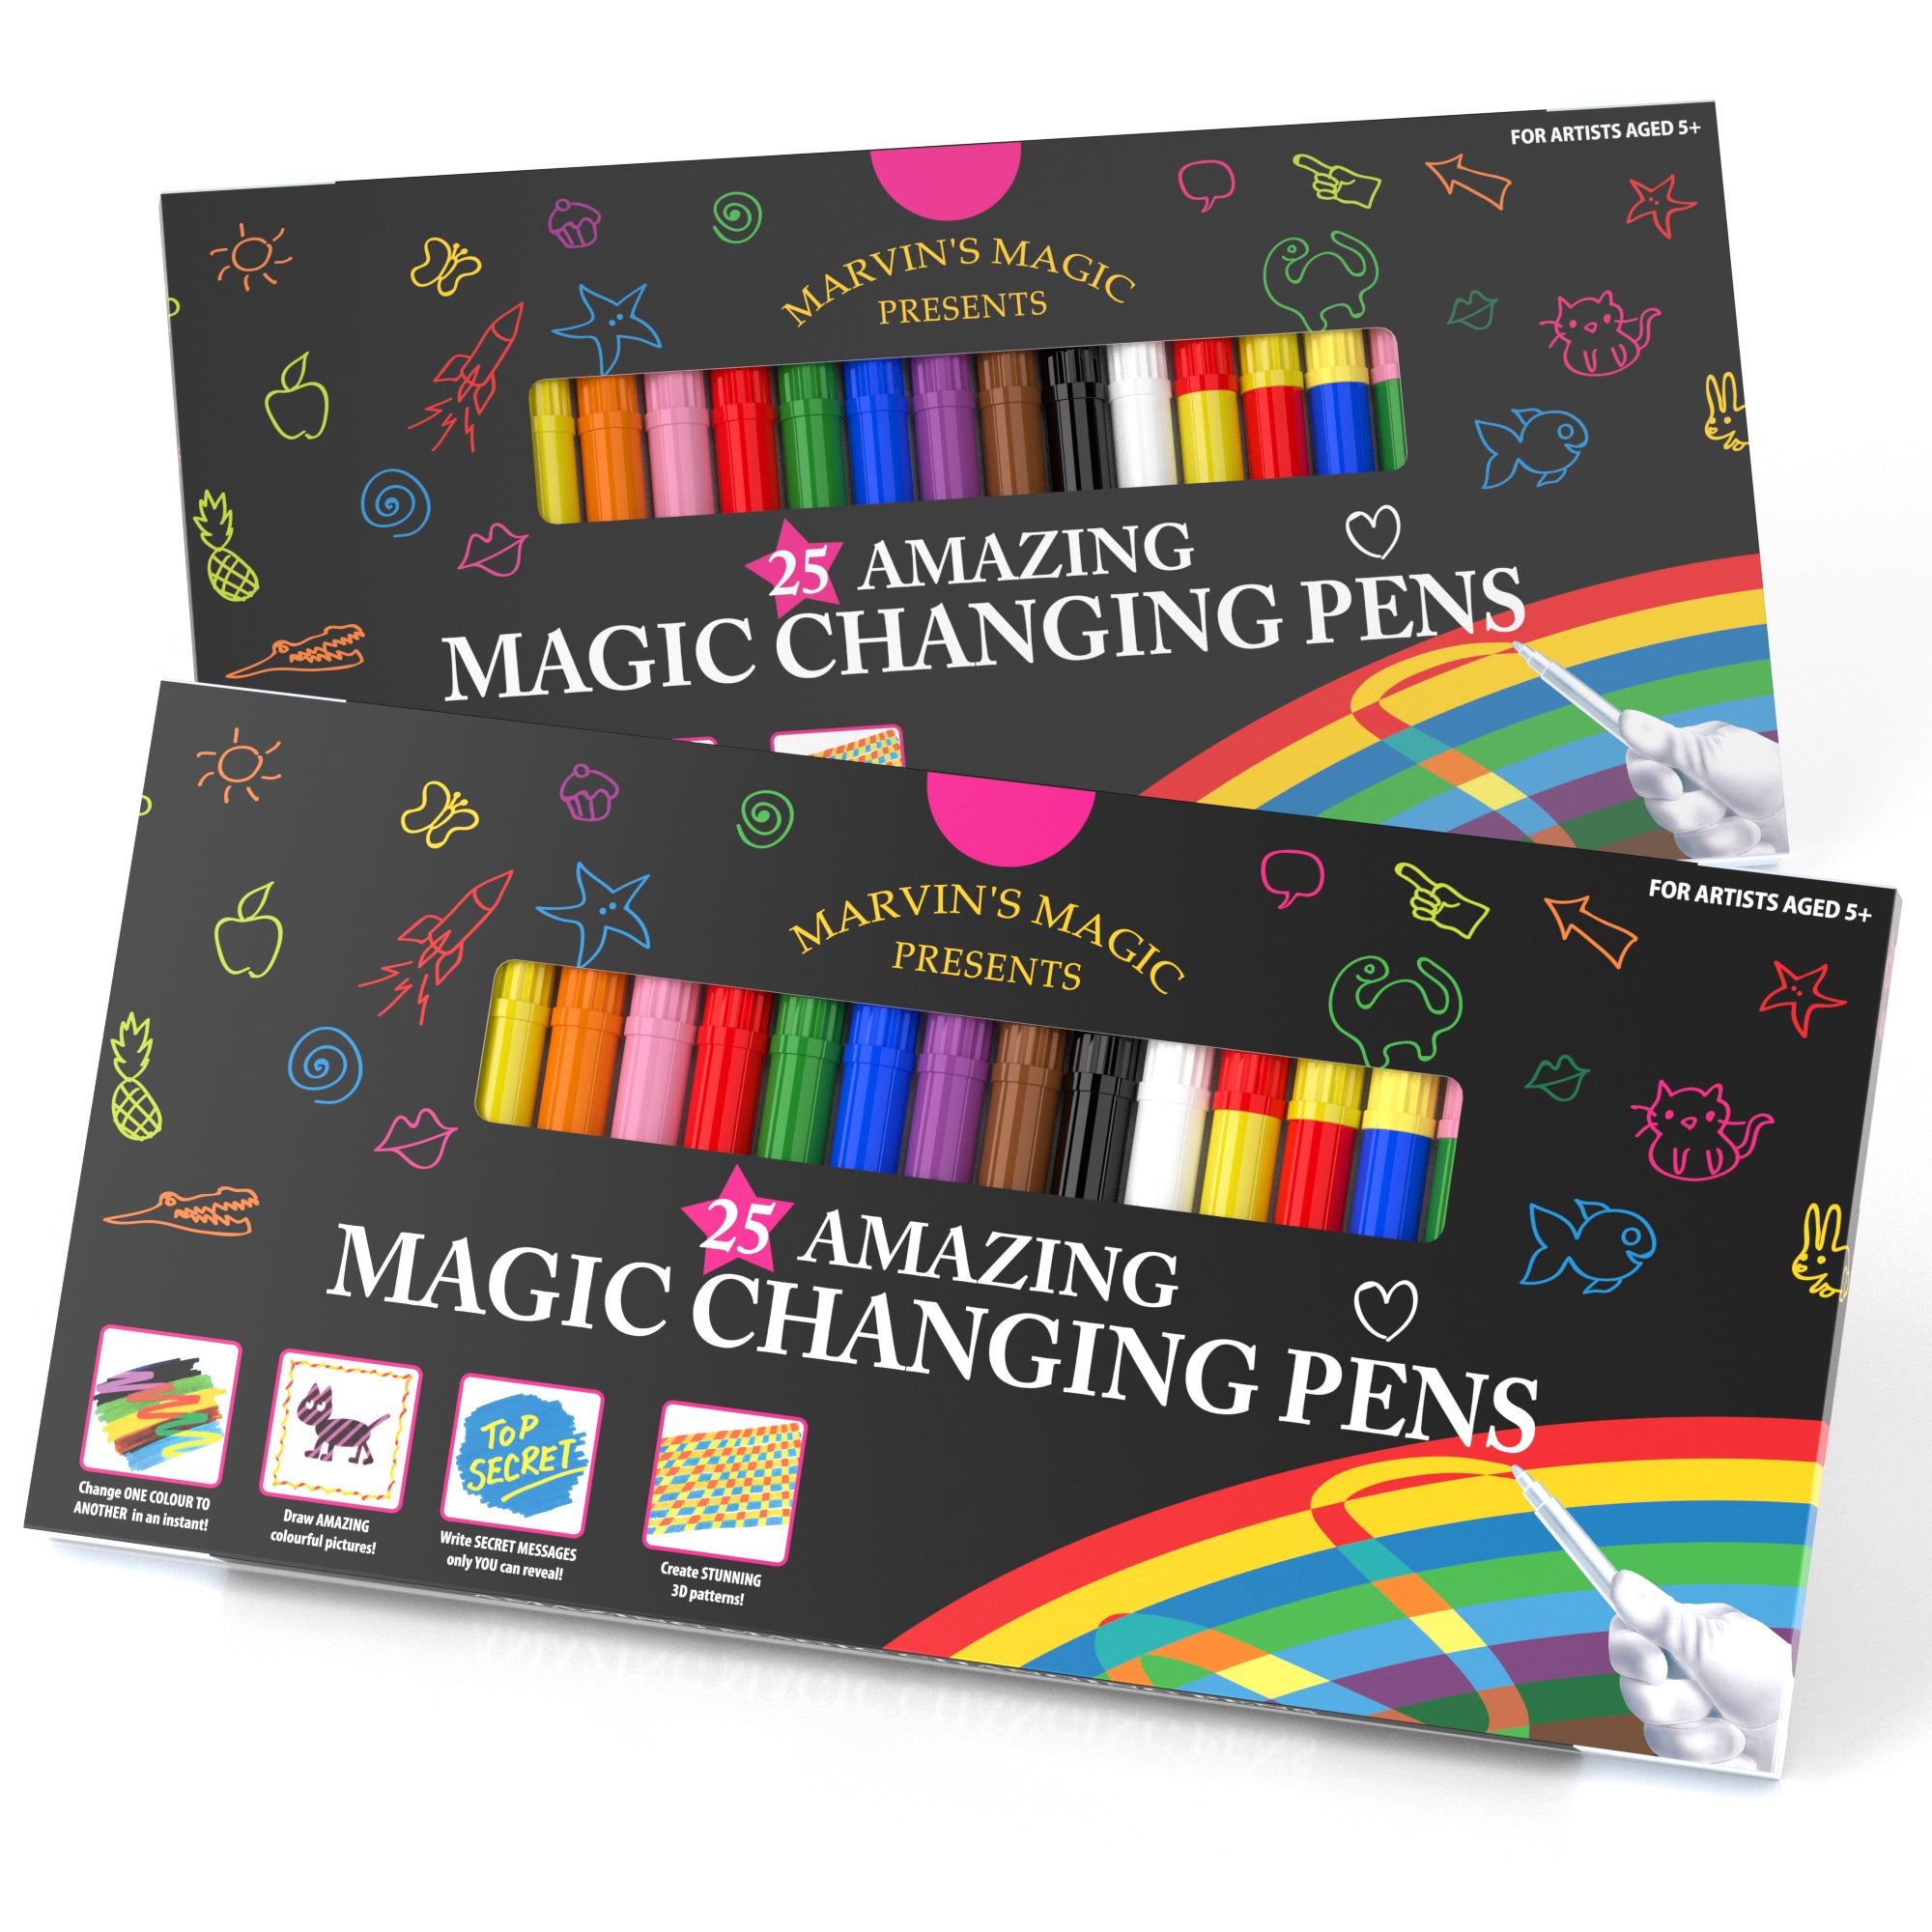 Marvin's Amazing Magic Pens (30 Pack) – Marvin's Magic Worldwide